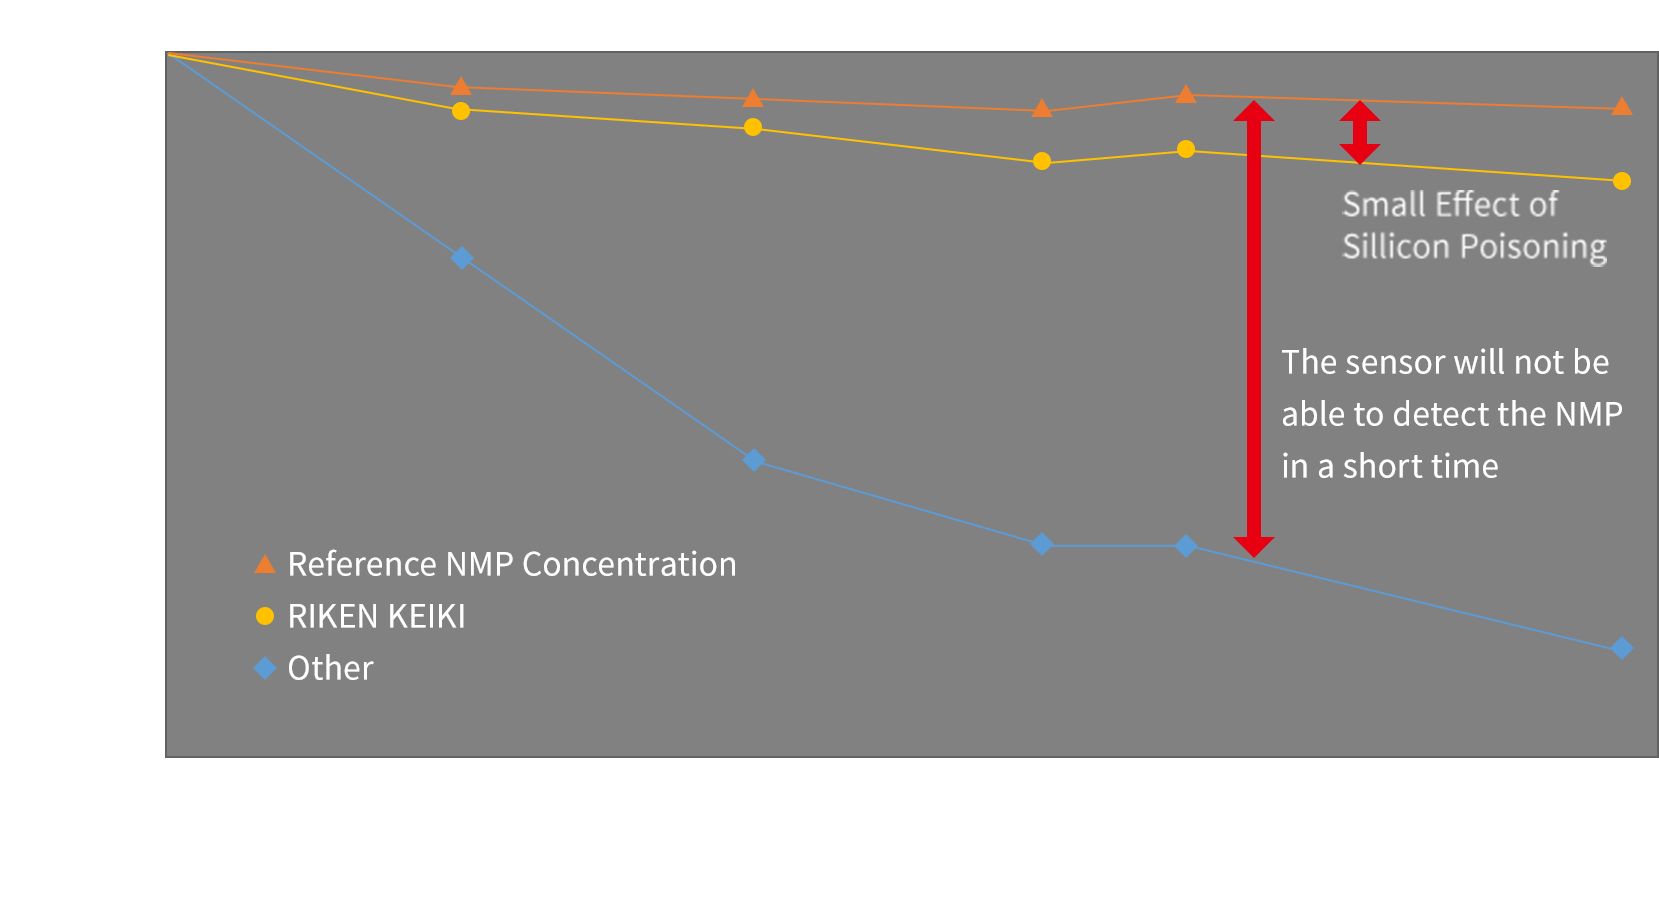 Sensitivity Change due to Silicon Poisoning